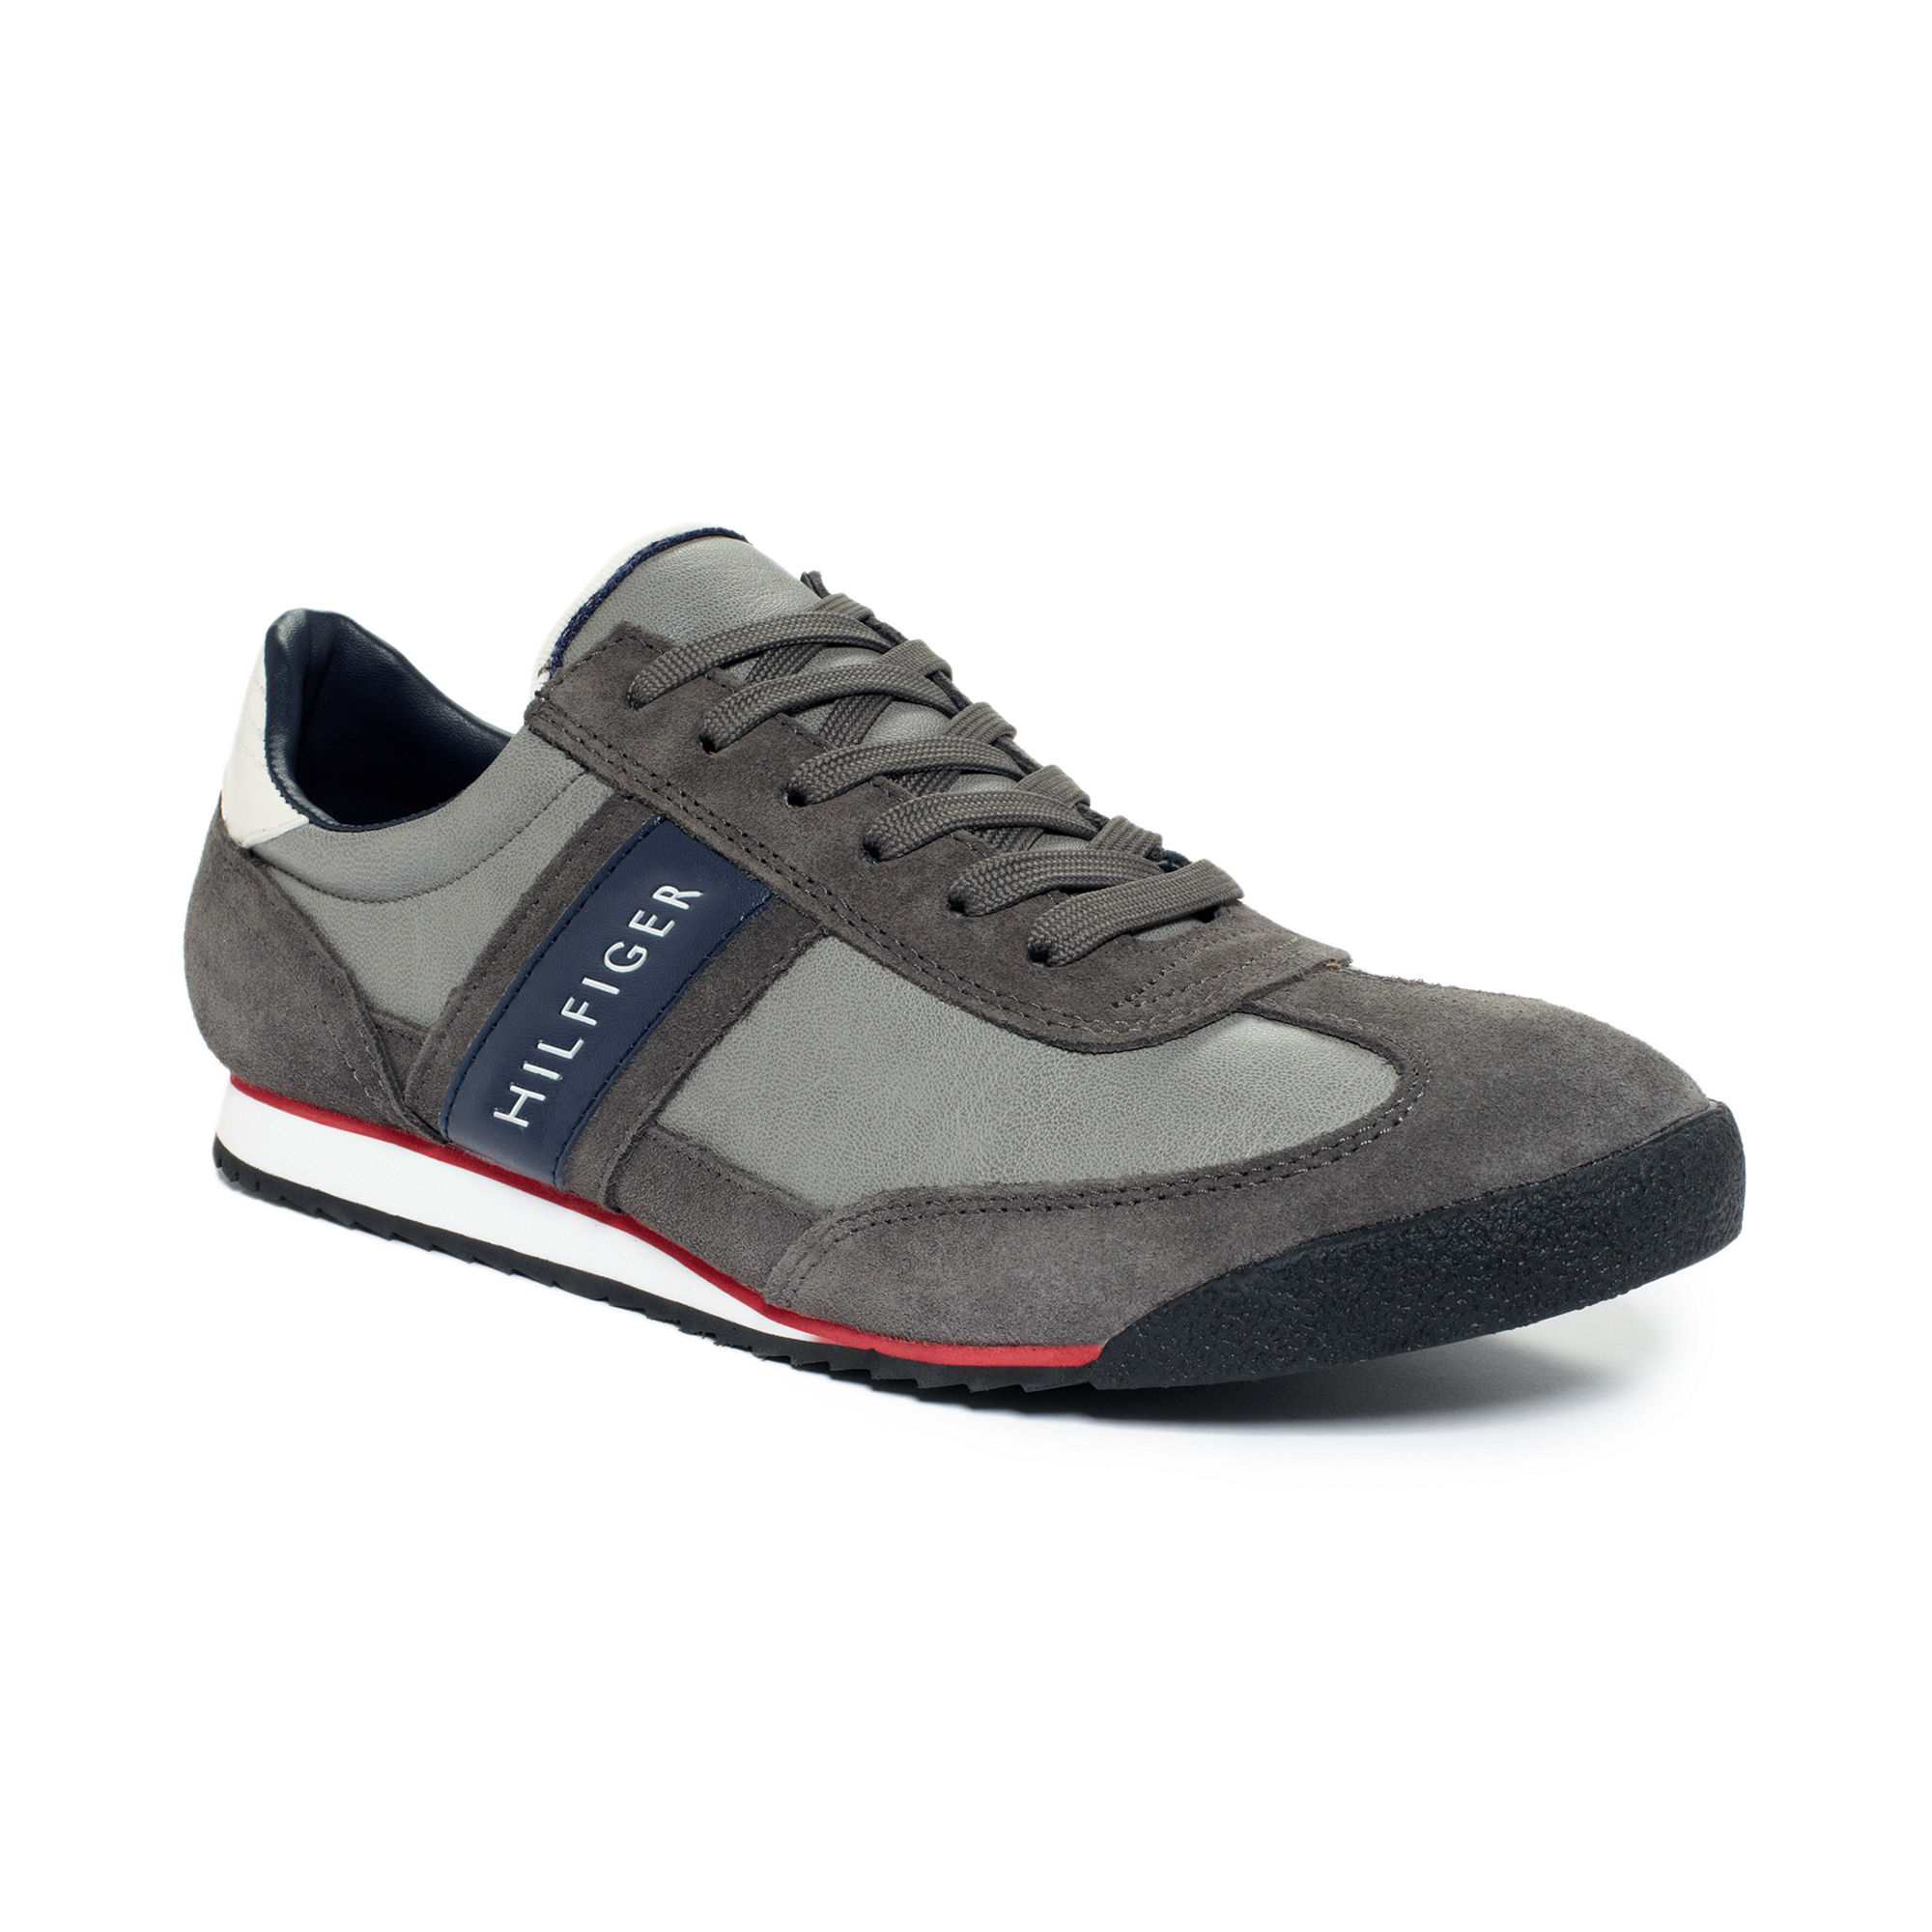 Tommy Hilfiger Claud 2 Lace Up Sneakers in Gray for Men - Lyst